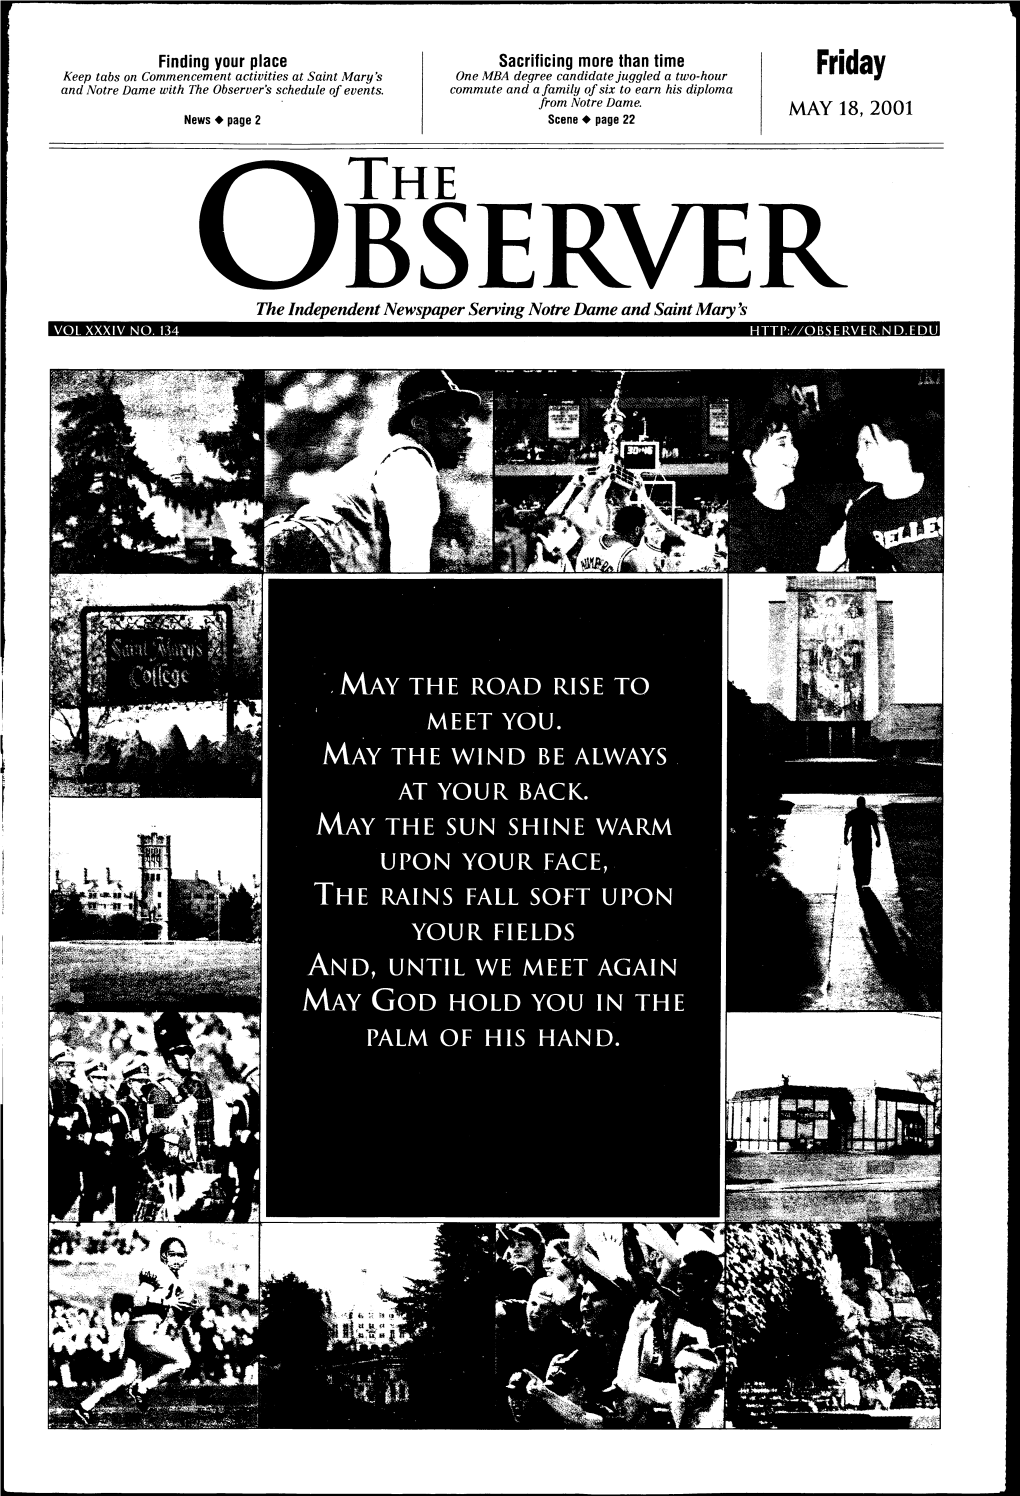 Observer's Schedule of Events